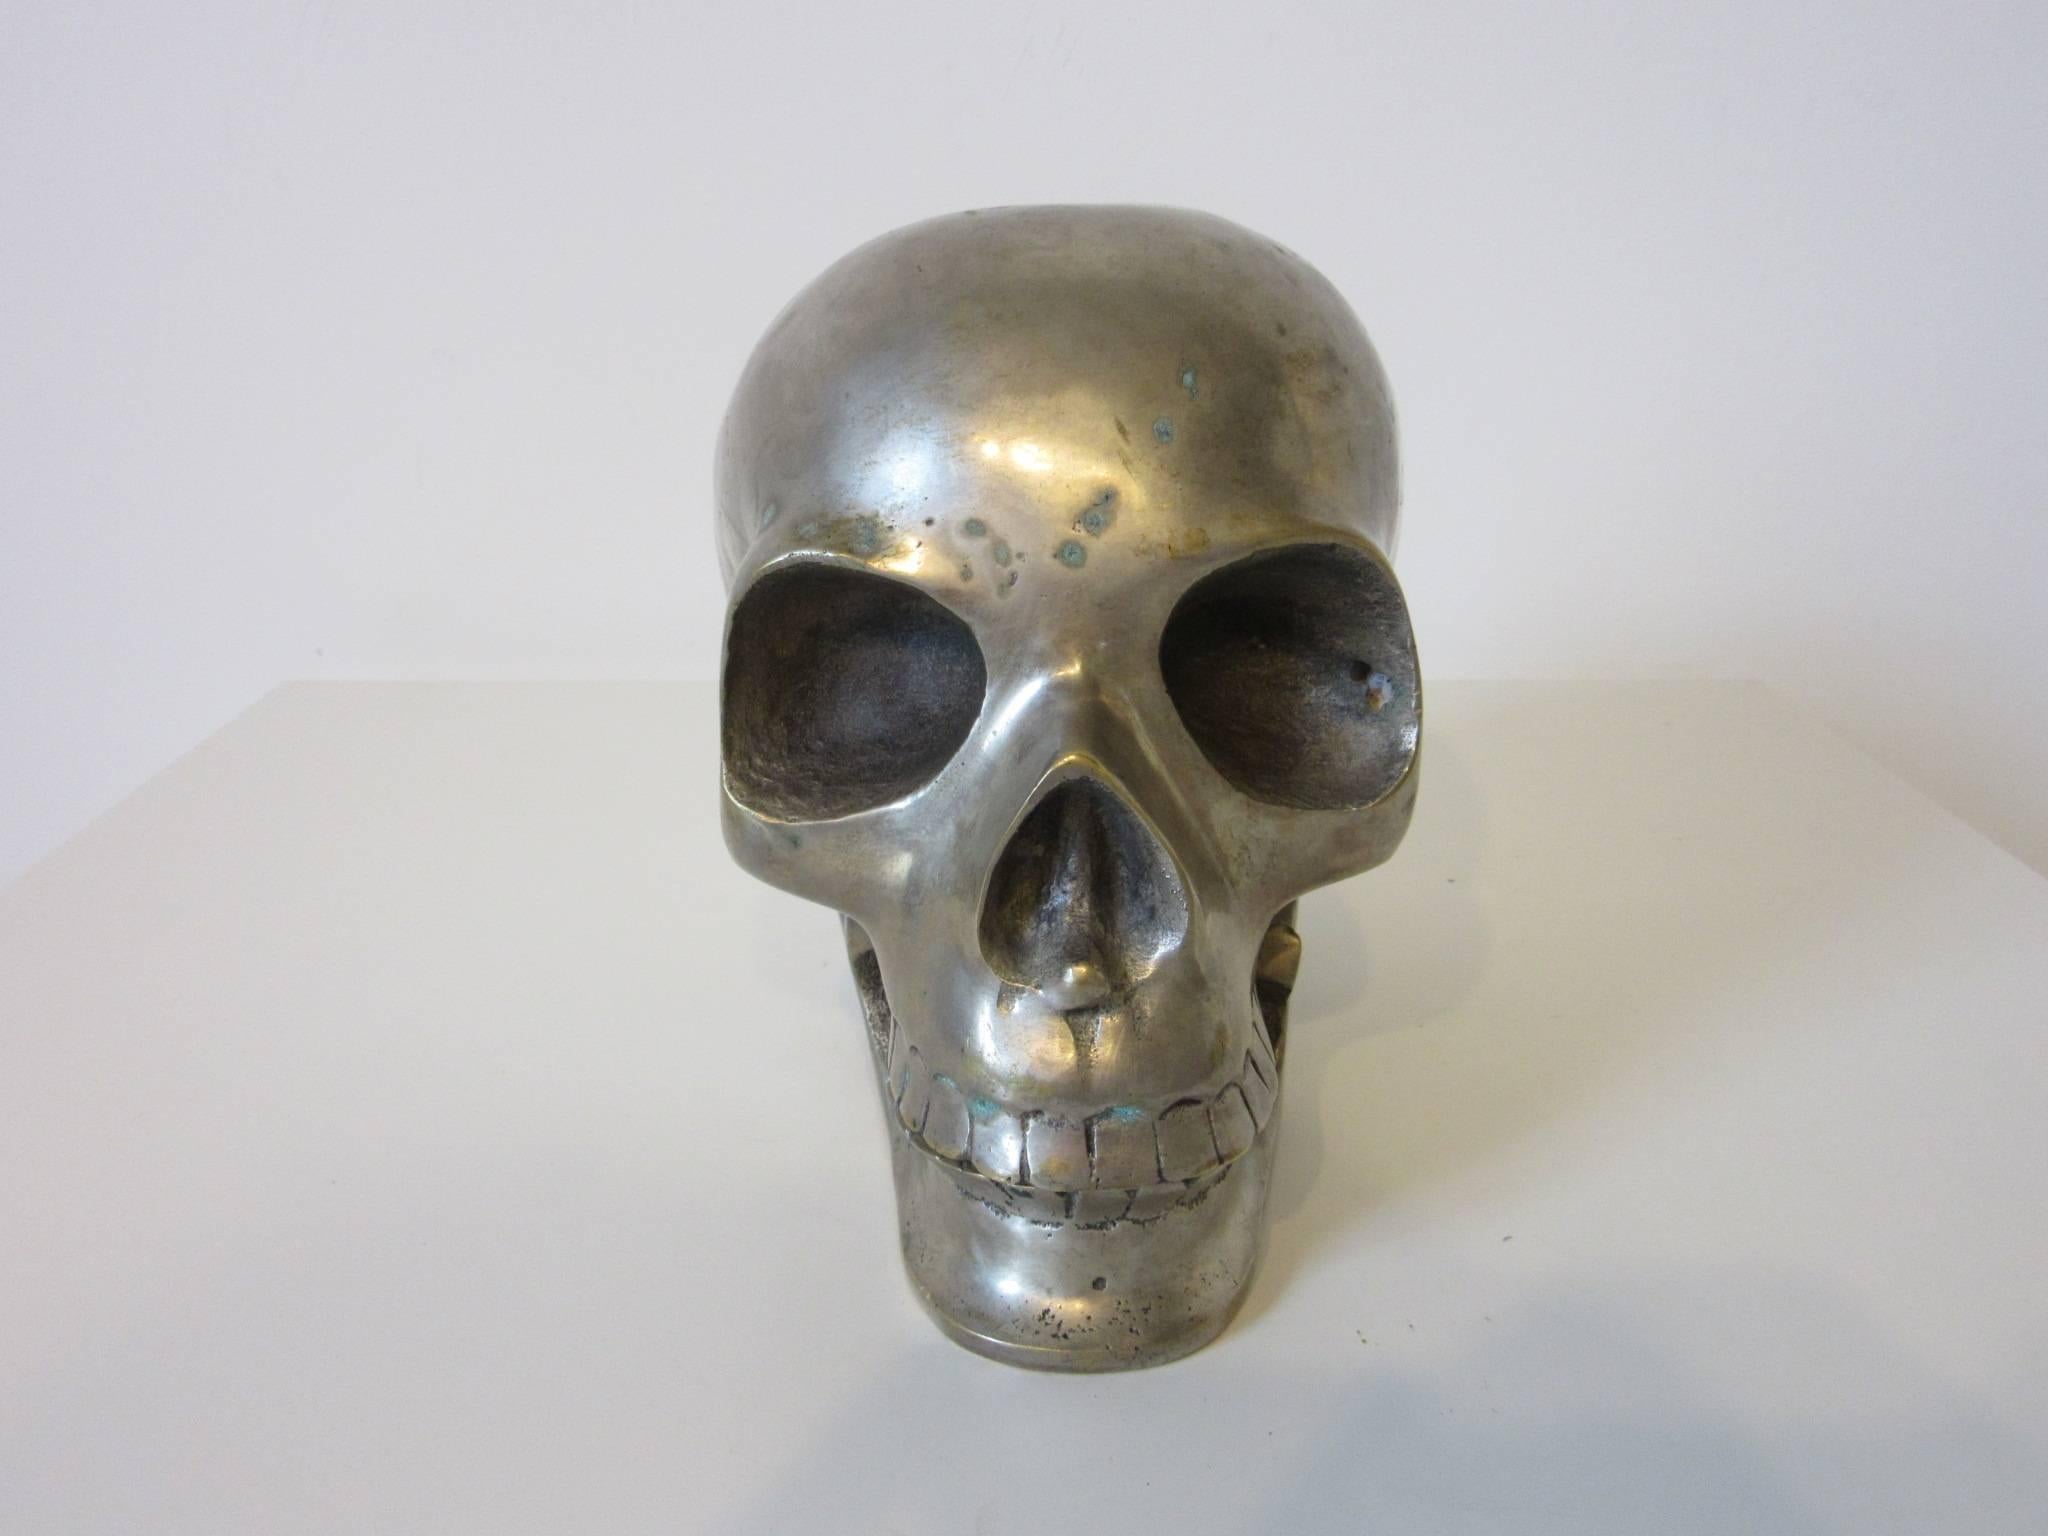 A nickel-plated brass secret society skull used in ceremonies with movable lower jaw, life size
well constructed with great detailing.